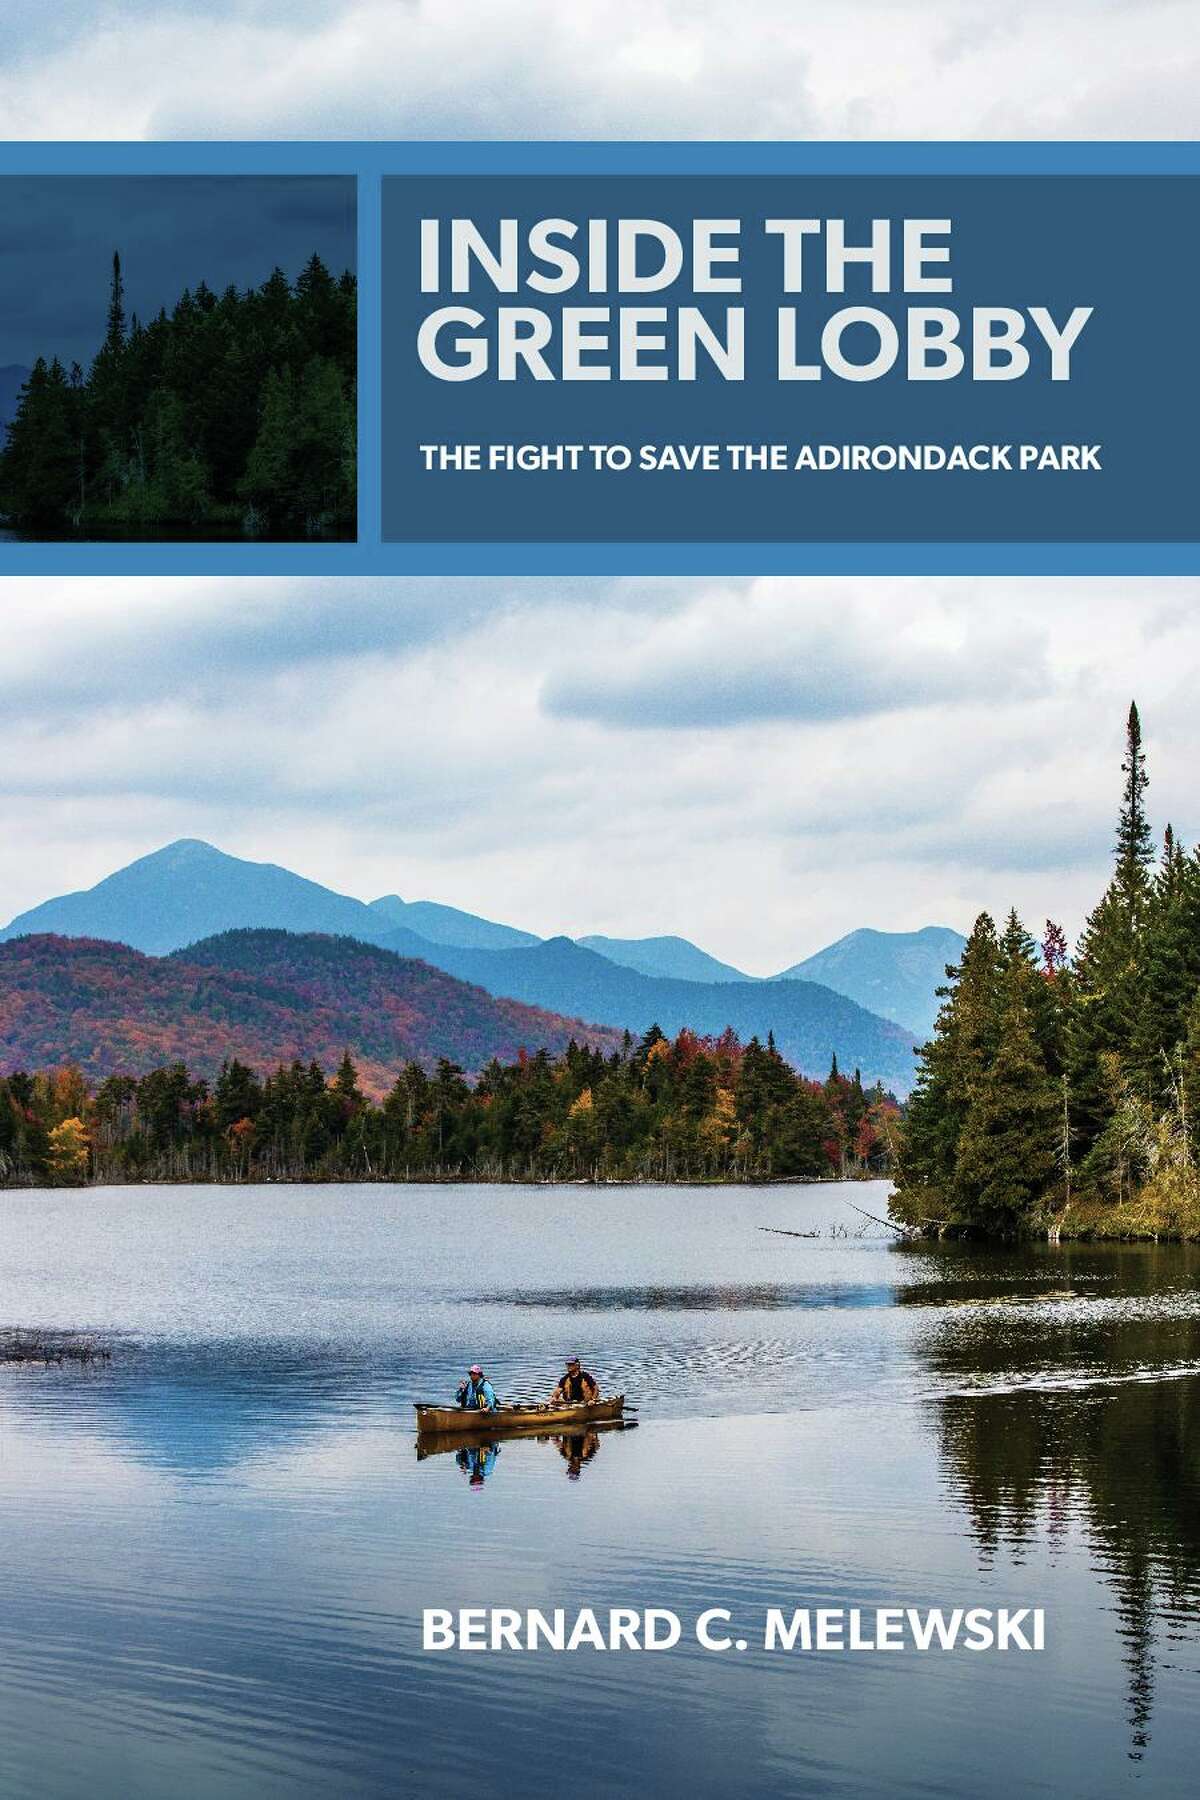 Bernard Melewski, a former lobbyist who worked for the Adirondack Council recently came out with "Inside the Green Lobby: The Fight to Save the Adirondacks."